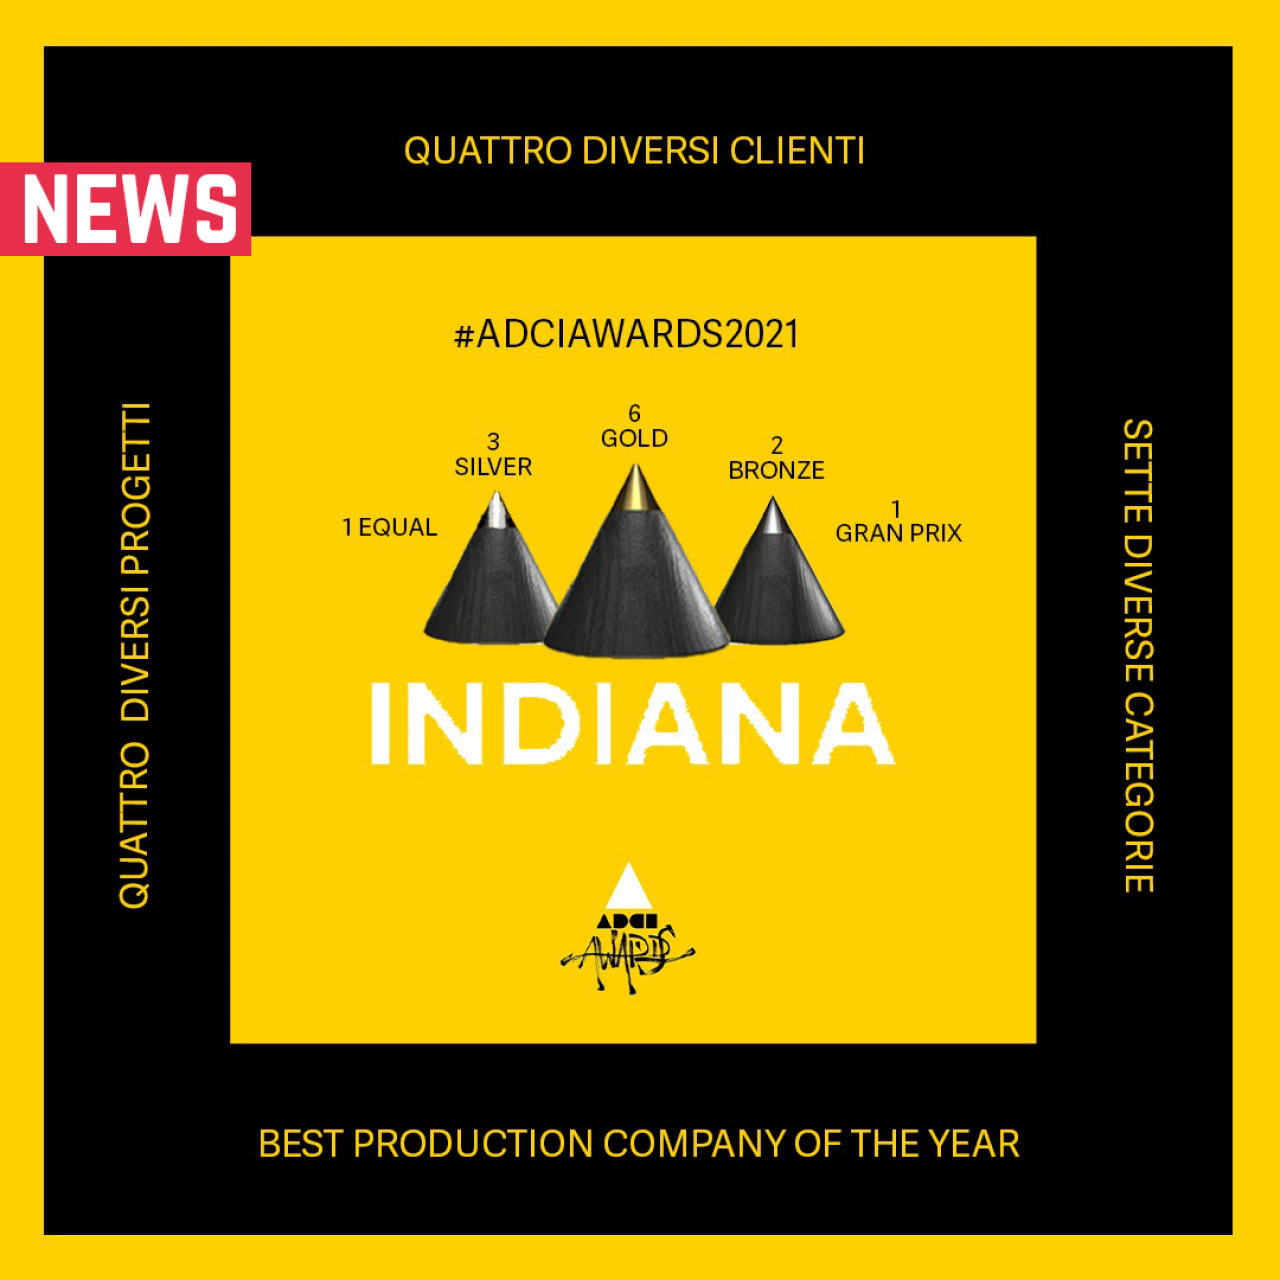 Production company of the year